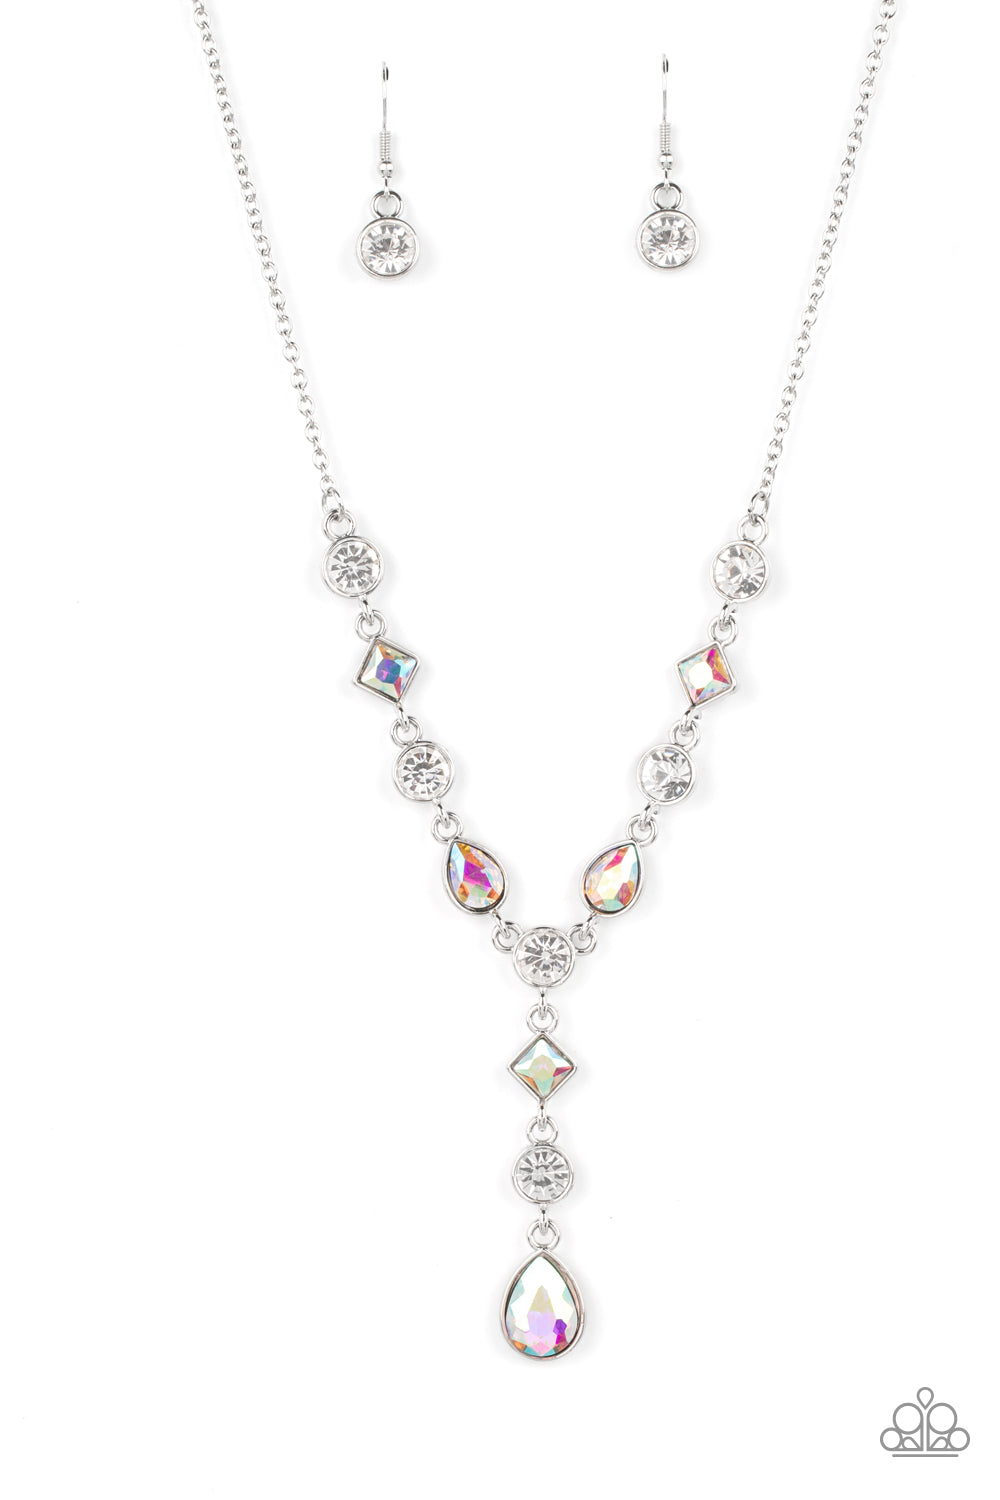 Paparazzi Accessories - Forget the Crown #N543 Peg - Multi Necklace